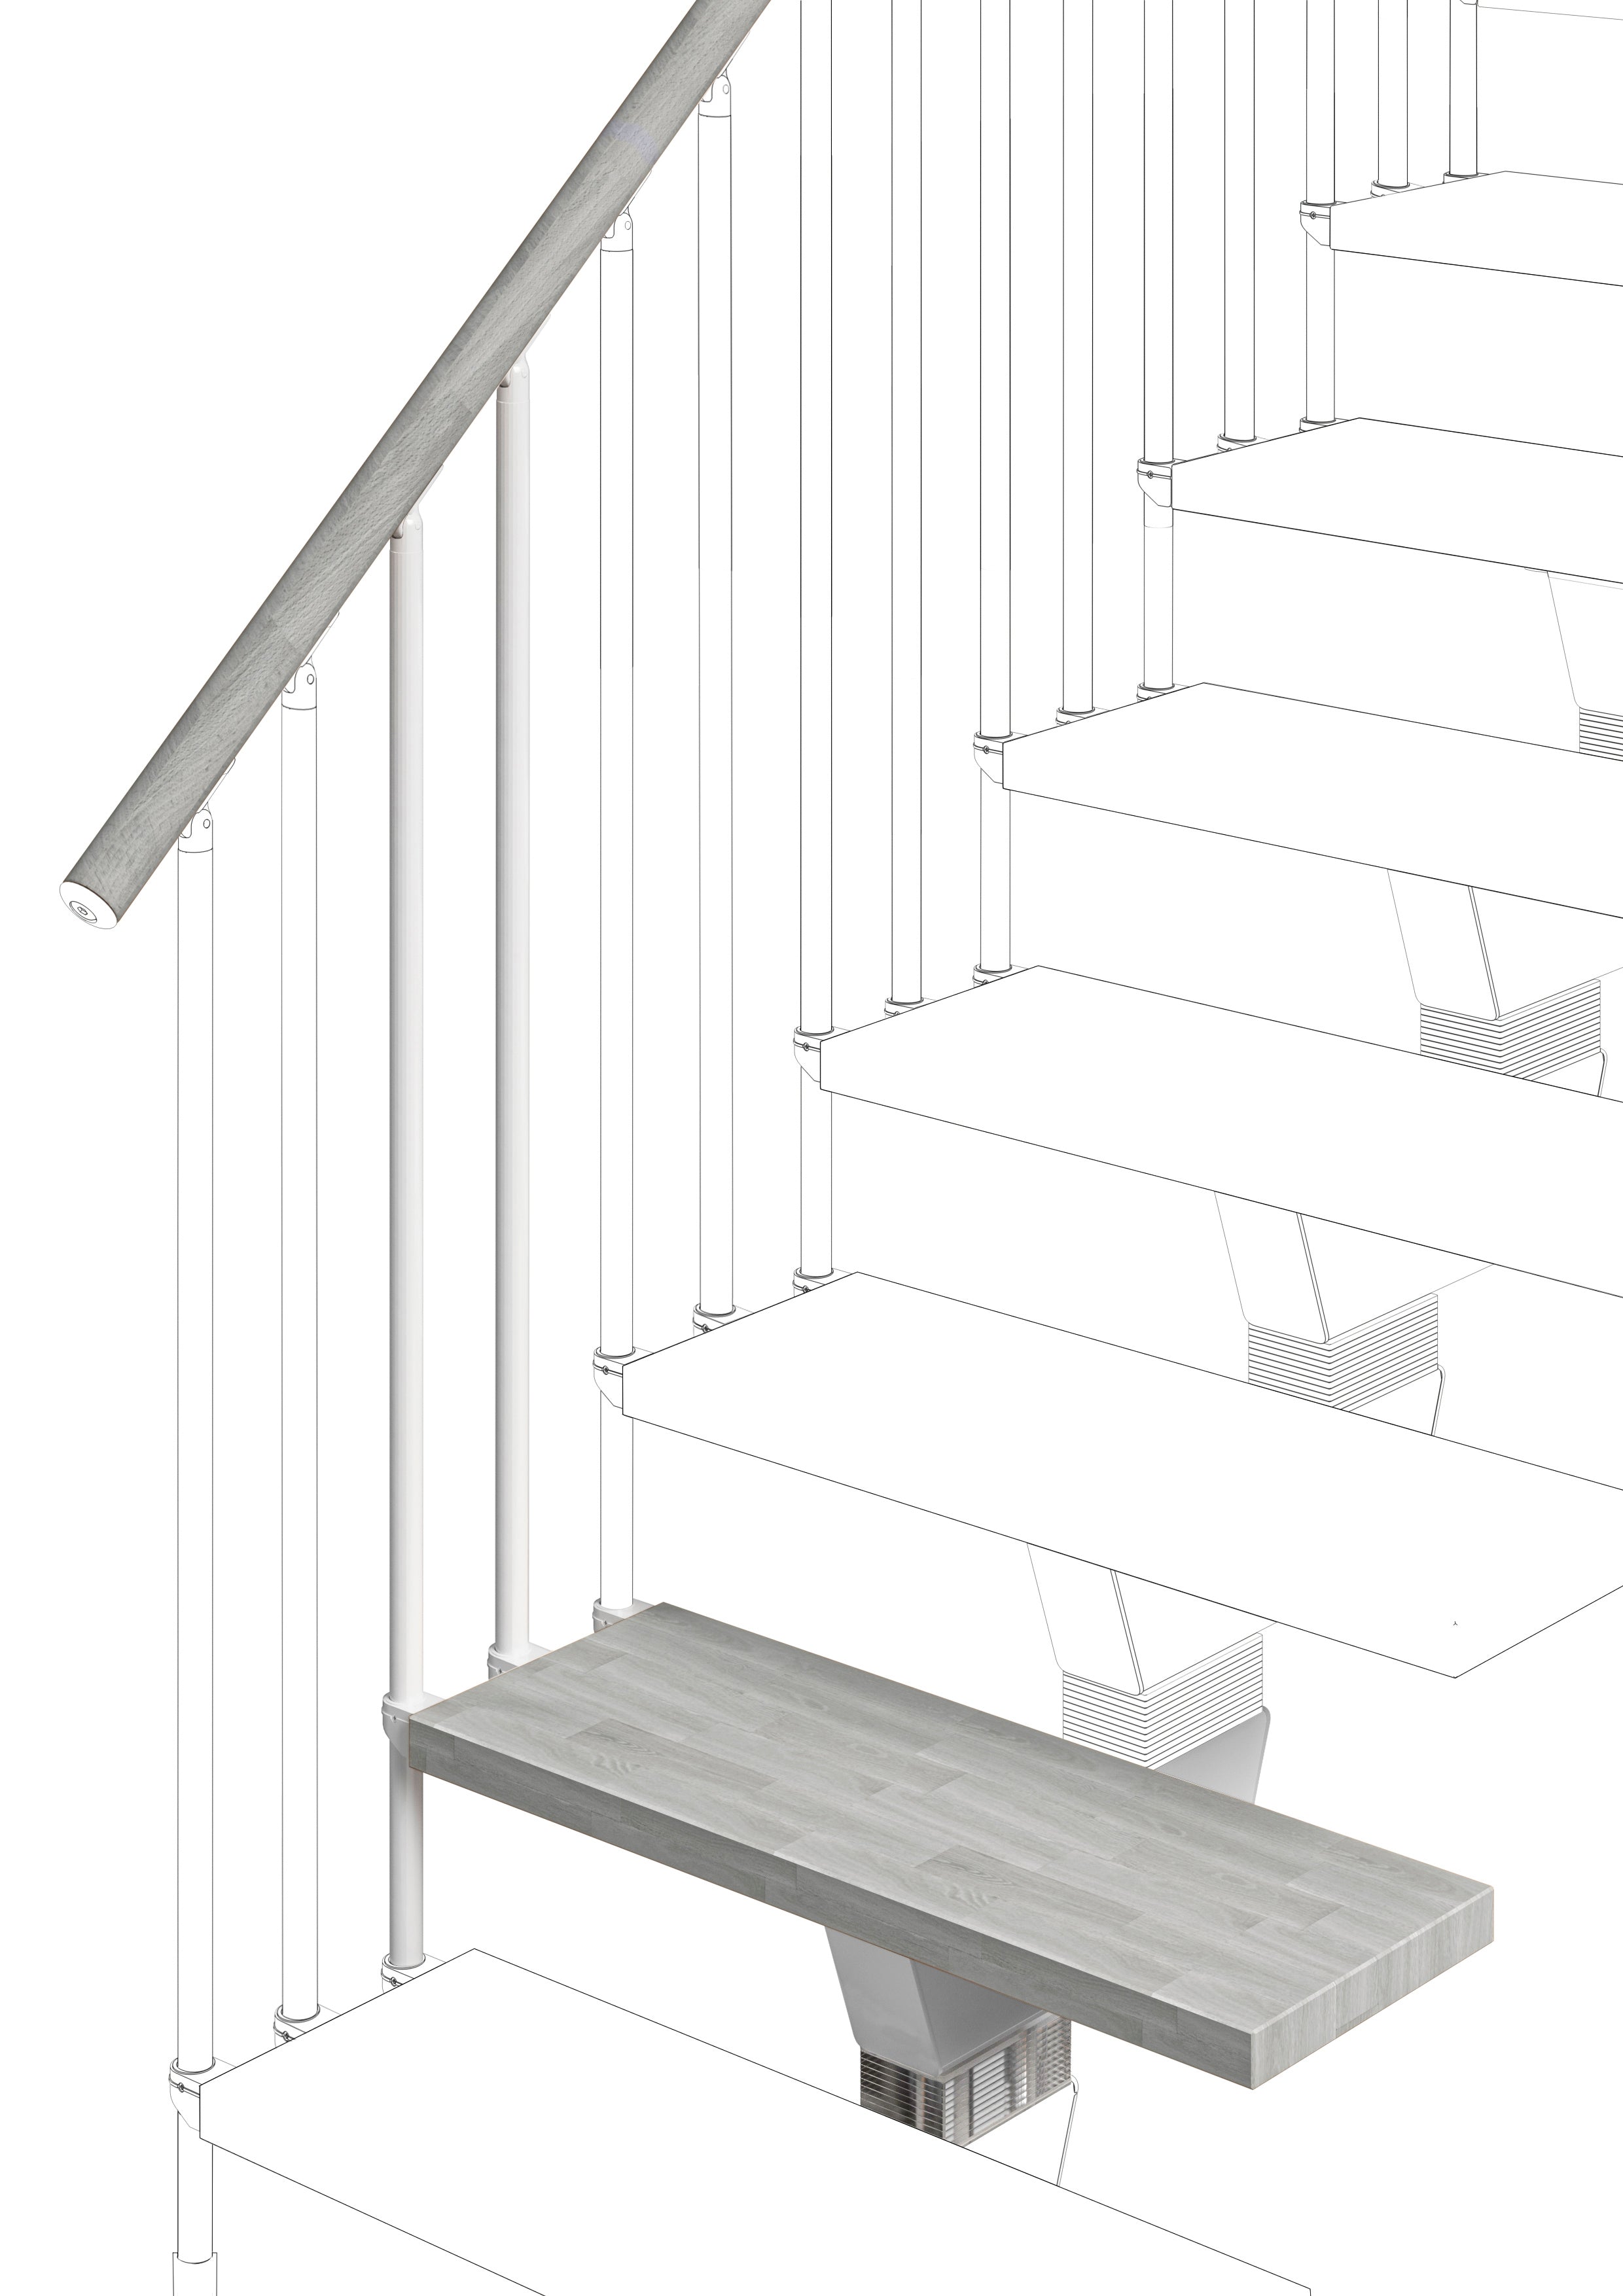 Additional step Modularis 95cm (with structure and railing) - Cement 89